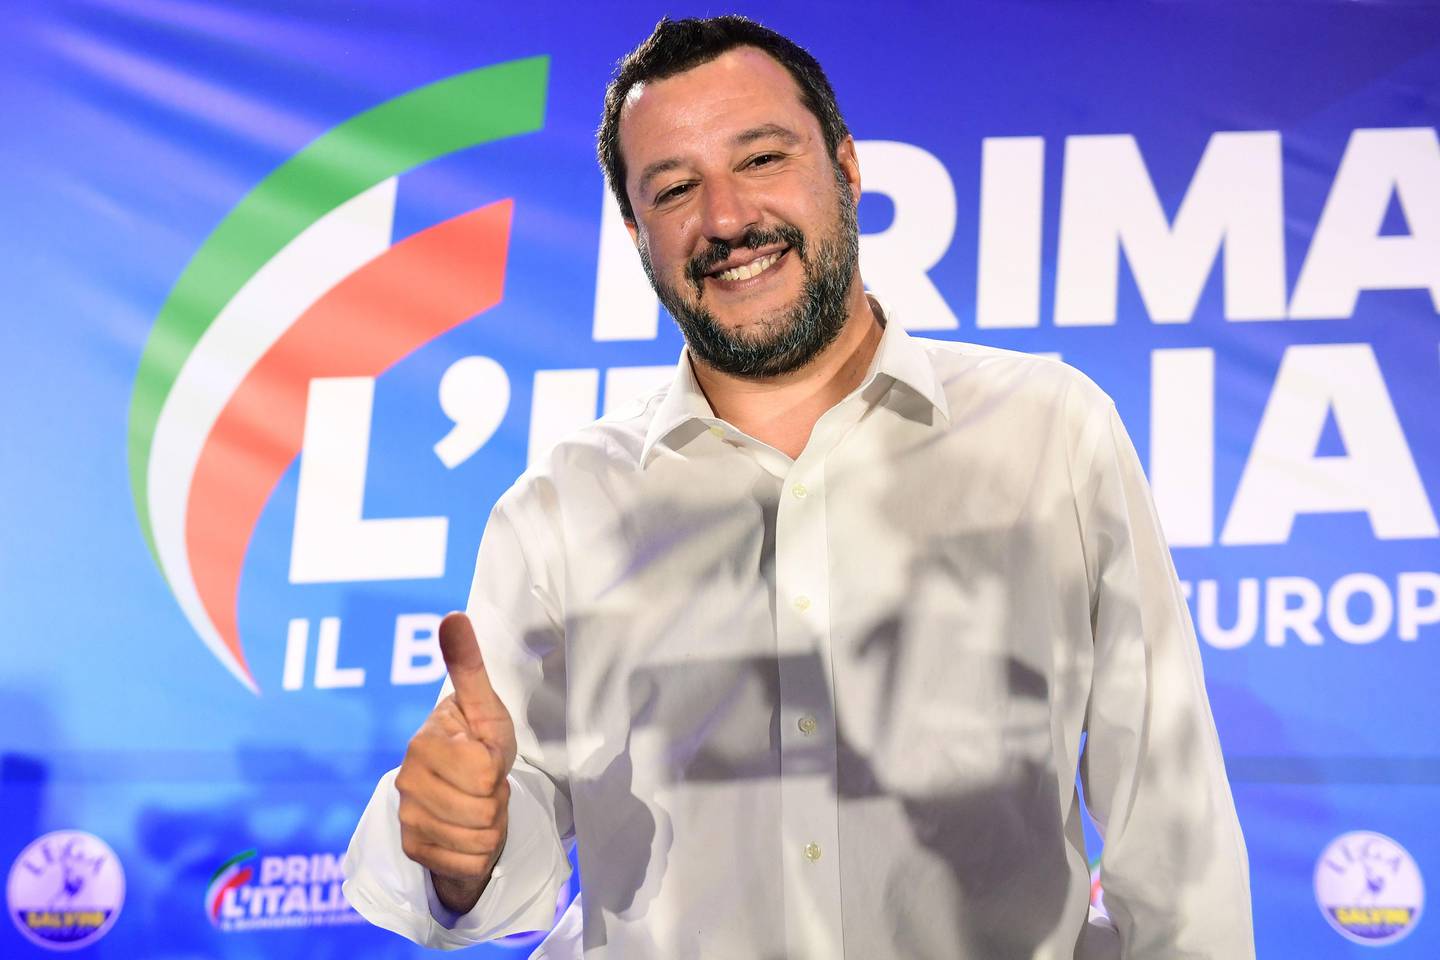 Italian Deputy Prime Minister and Interior Minister Matteo Salvini gives a "thumbs up" during a press conference in the Lega headquarters in northern Milan following the results of the European parliamentary elections, on May 27, 2019. - Matteo Salvini's anti-migrant League party won the most votes on May 26 in European elections in Italy, marking a historic success for the far-right. With over 99 percent of ballots counted, the League won 34.3 percent, compared to just six percent in the 2014 EU elections and 17 percent in the Italian general election last year. (Photo by Miguel MEDINA / AFP)